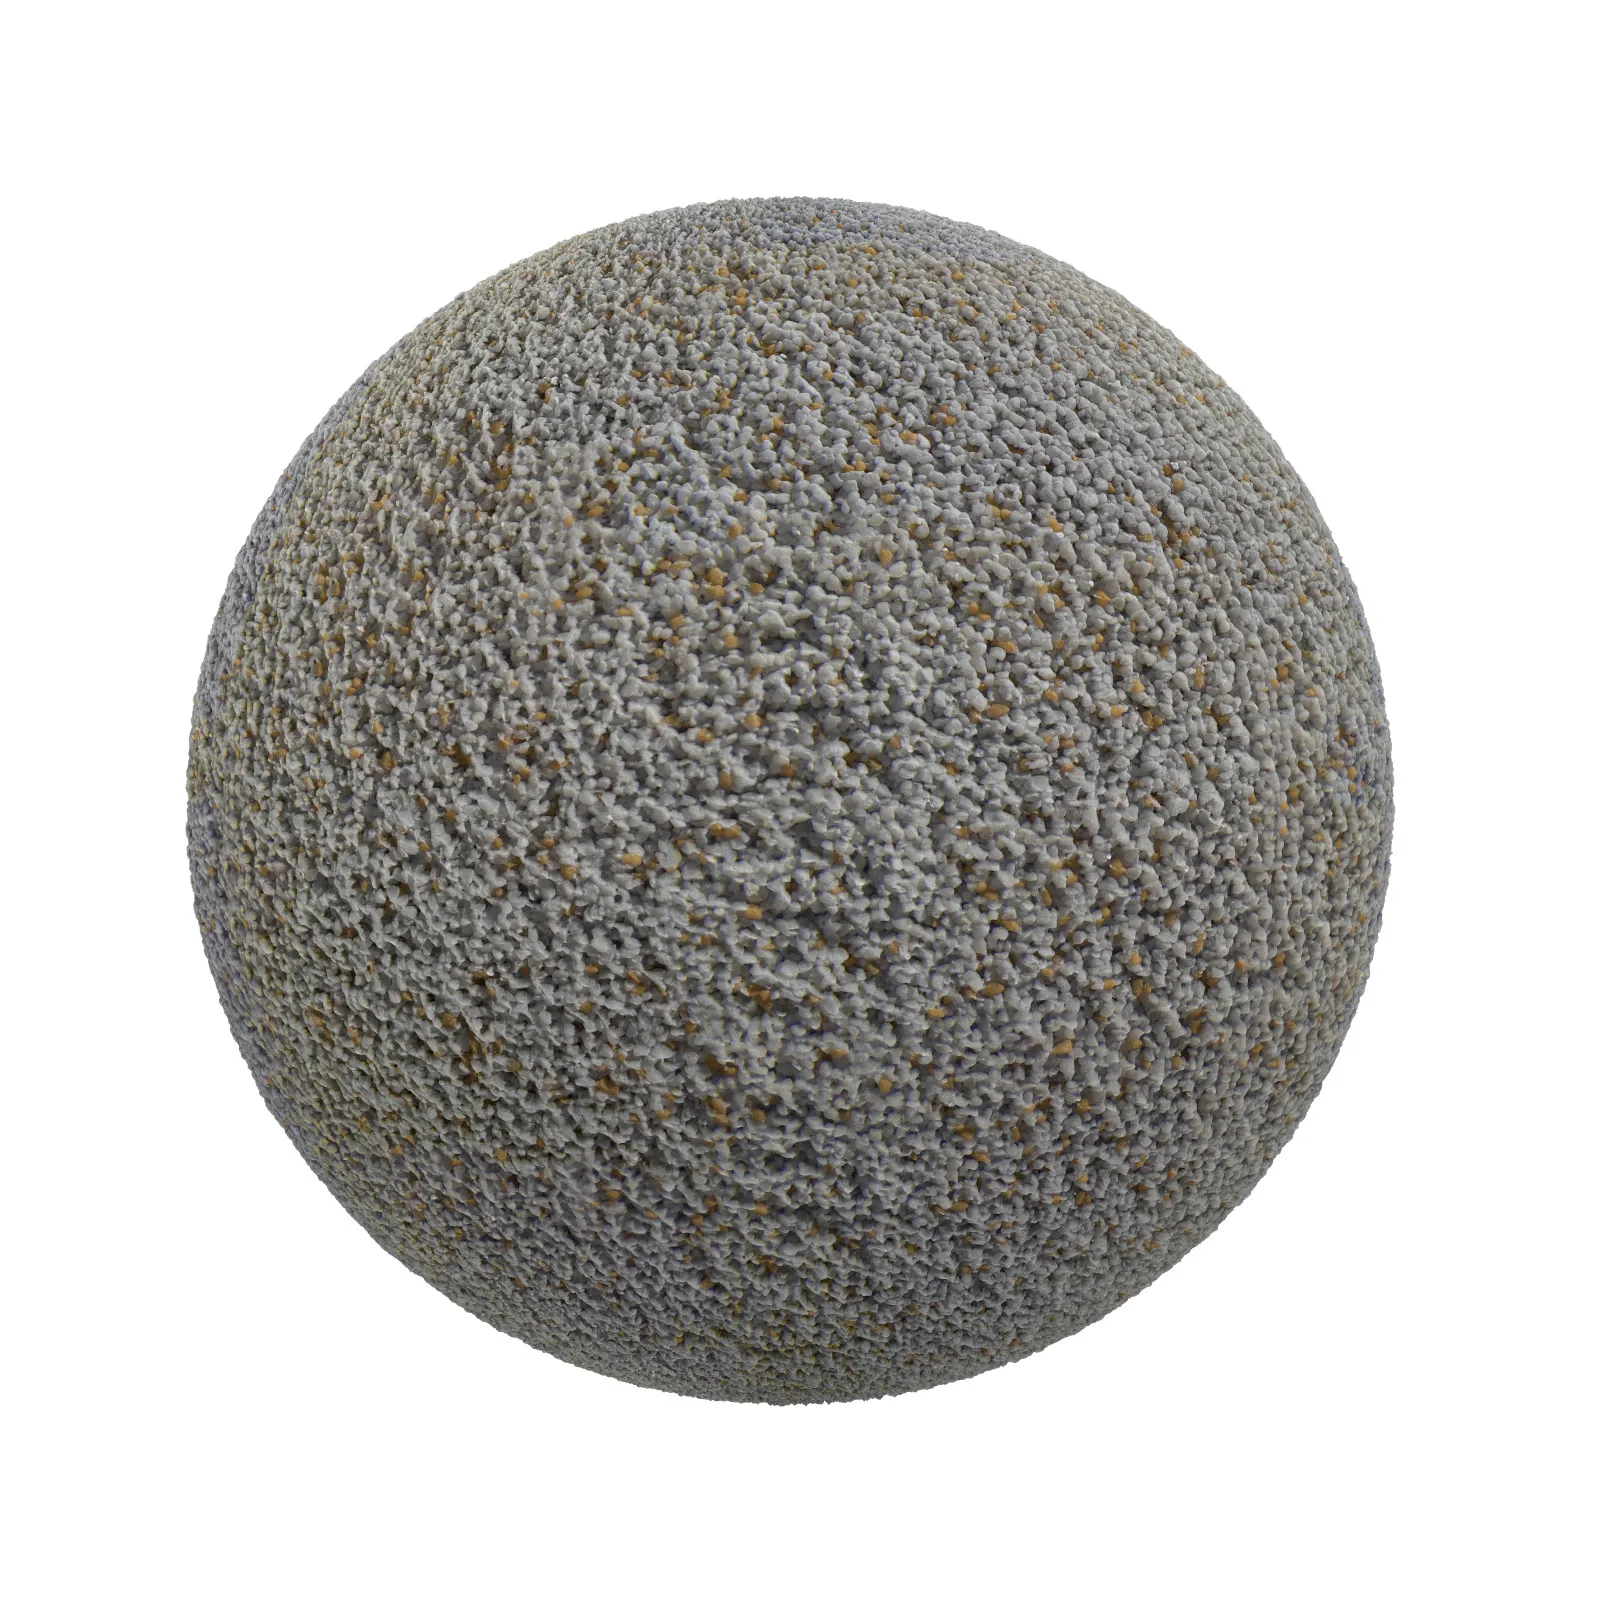 TEXTURES – STONES – CGAxis PBR Colection Vol 1 Stones – small gravel